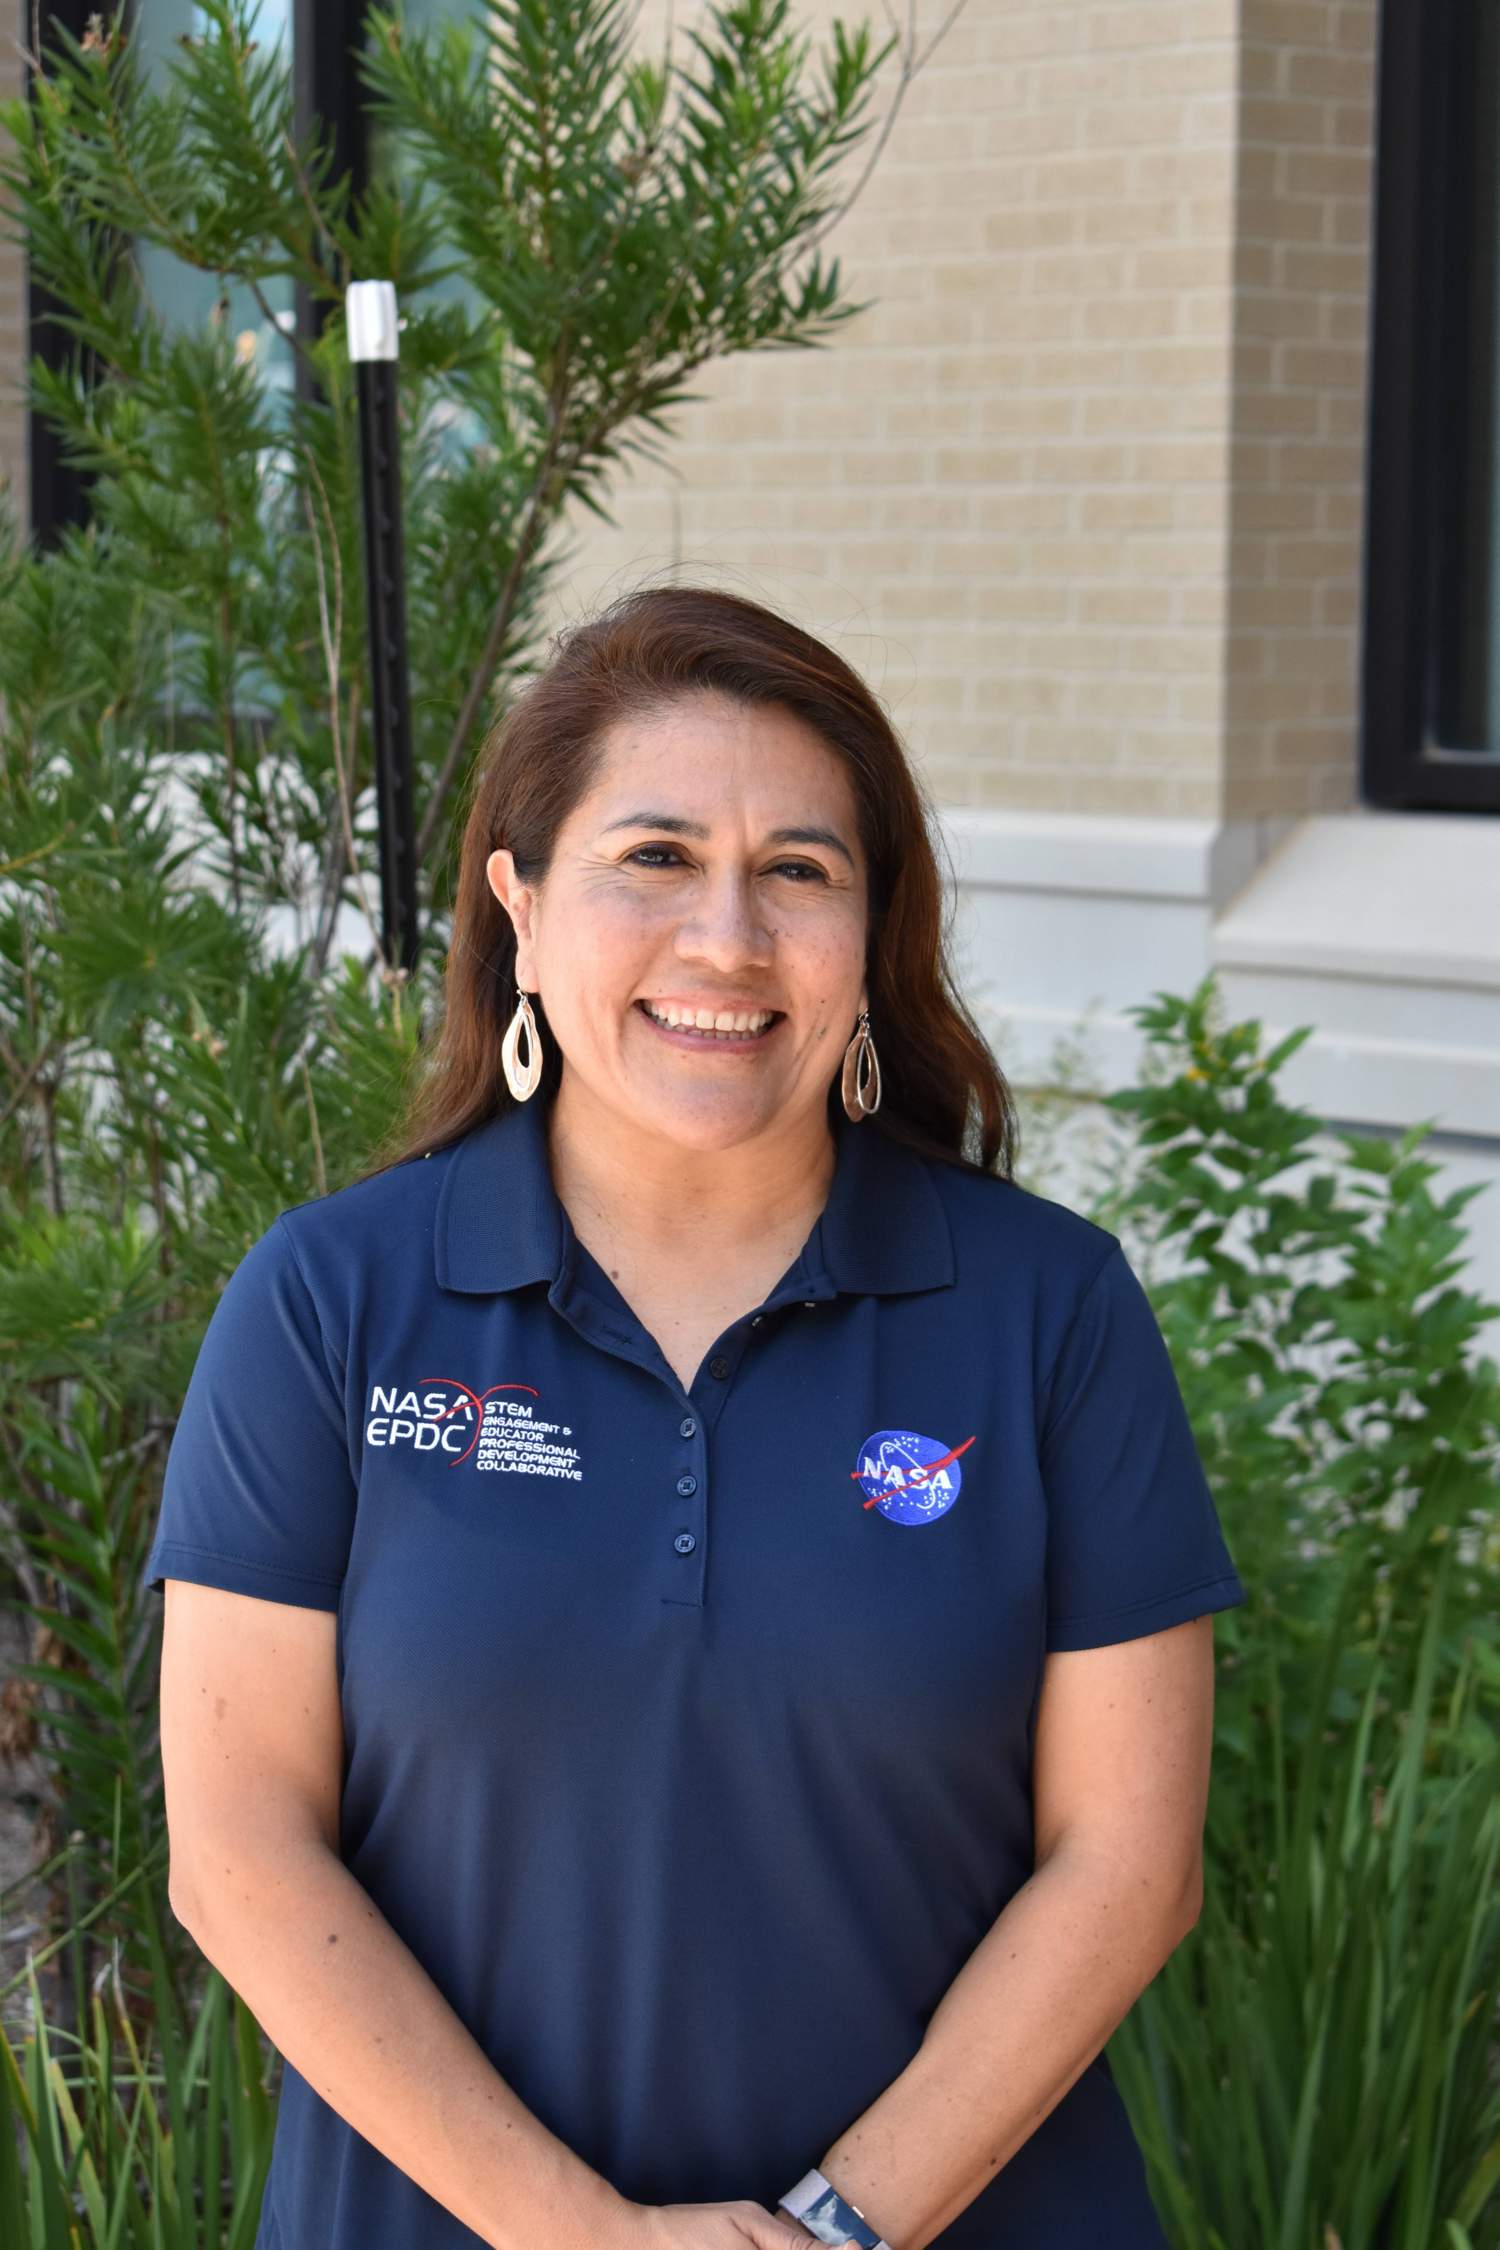 Texas State is nominated for the NASA Future Aerospace Engineers and Mathematicians Academy, led by Dr. Araceli Martinez Ortiz